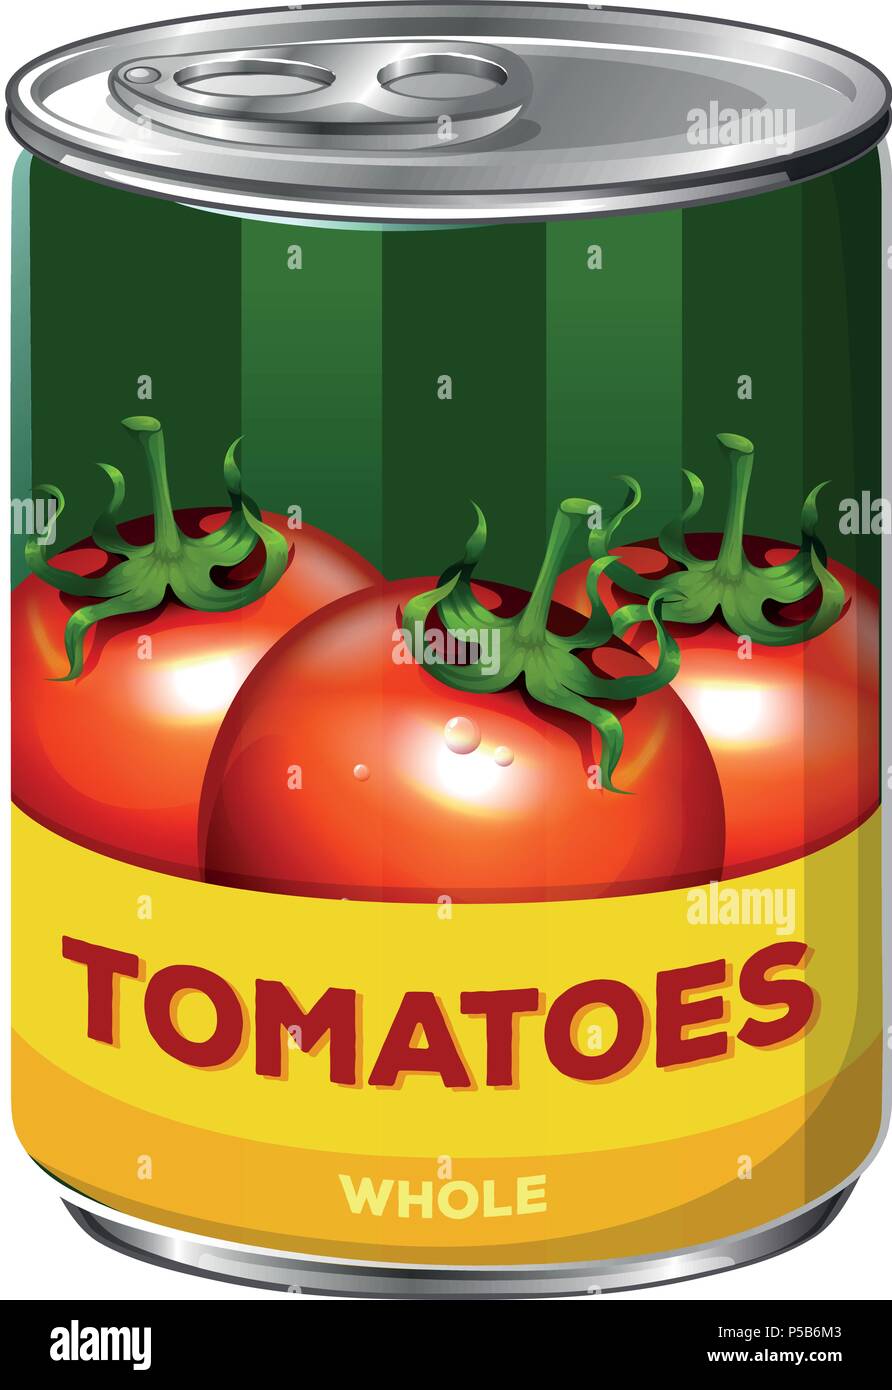 A Can of Whole Tomatoes illustration Stock Vector